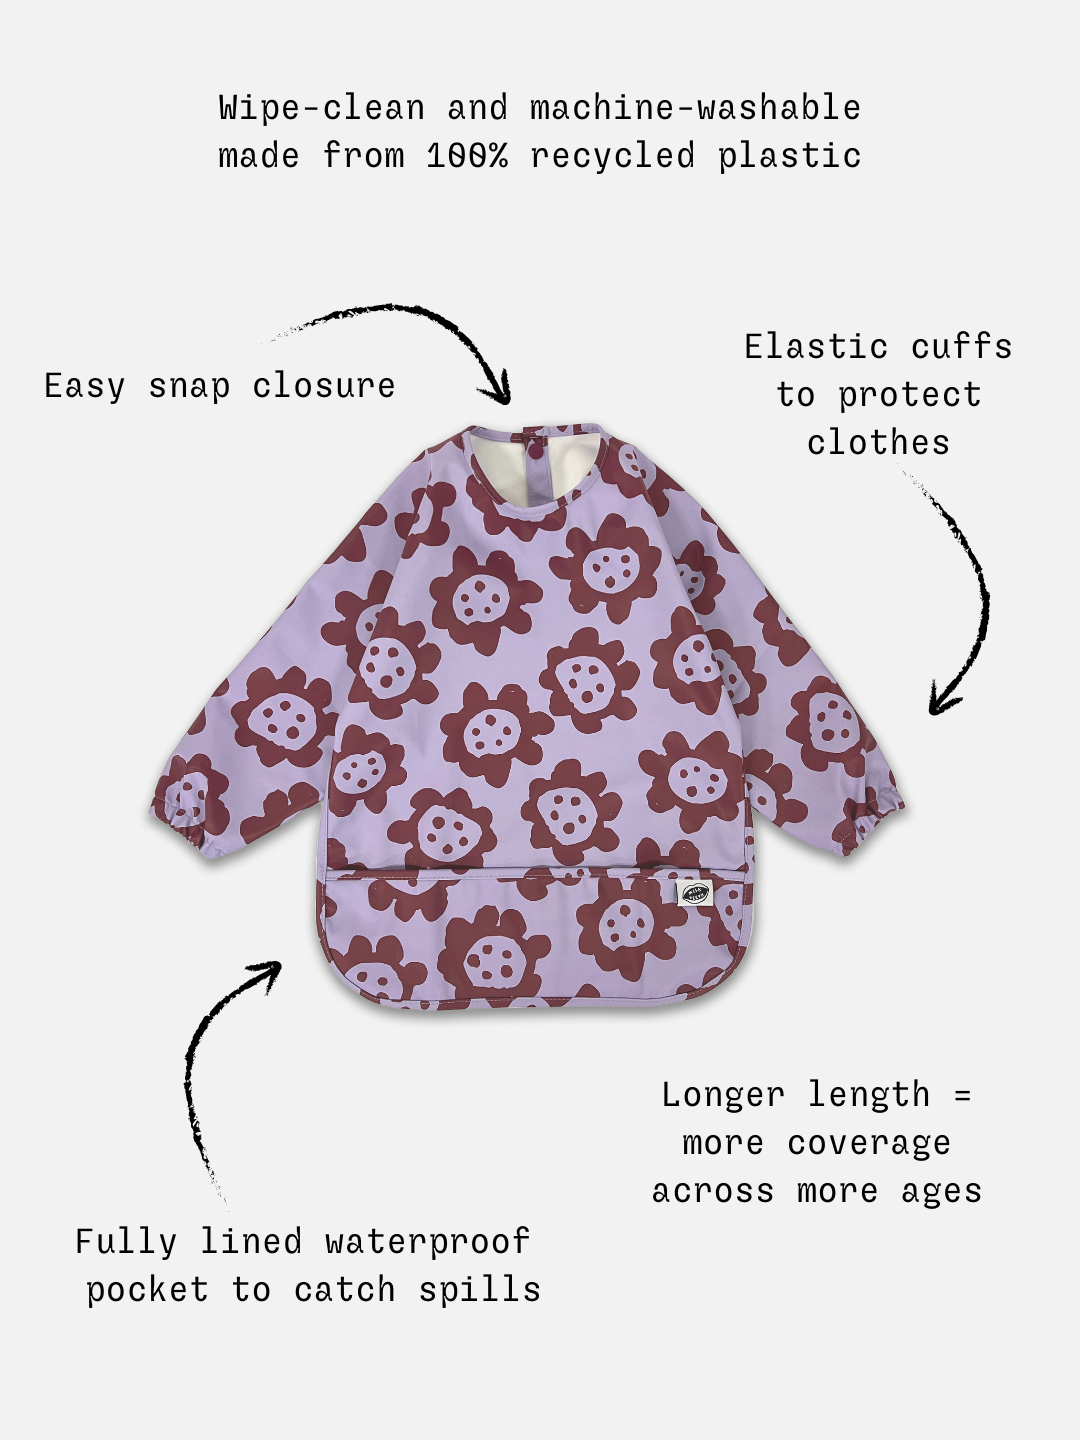 Detailed information of the long sleeve lavender colored bib with dark purple sunflowers and a front pocket.